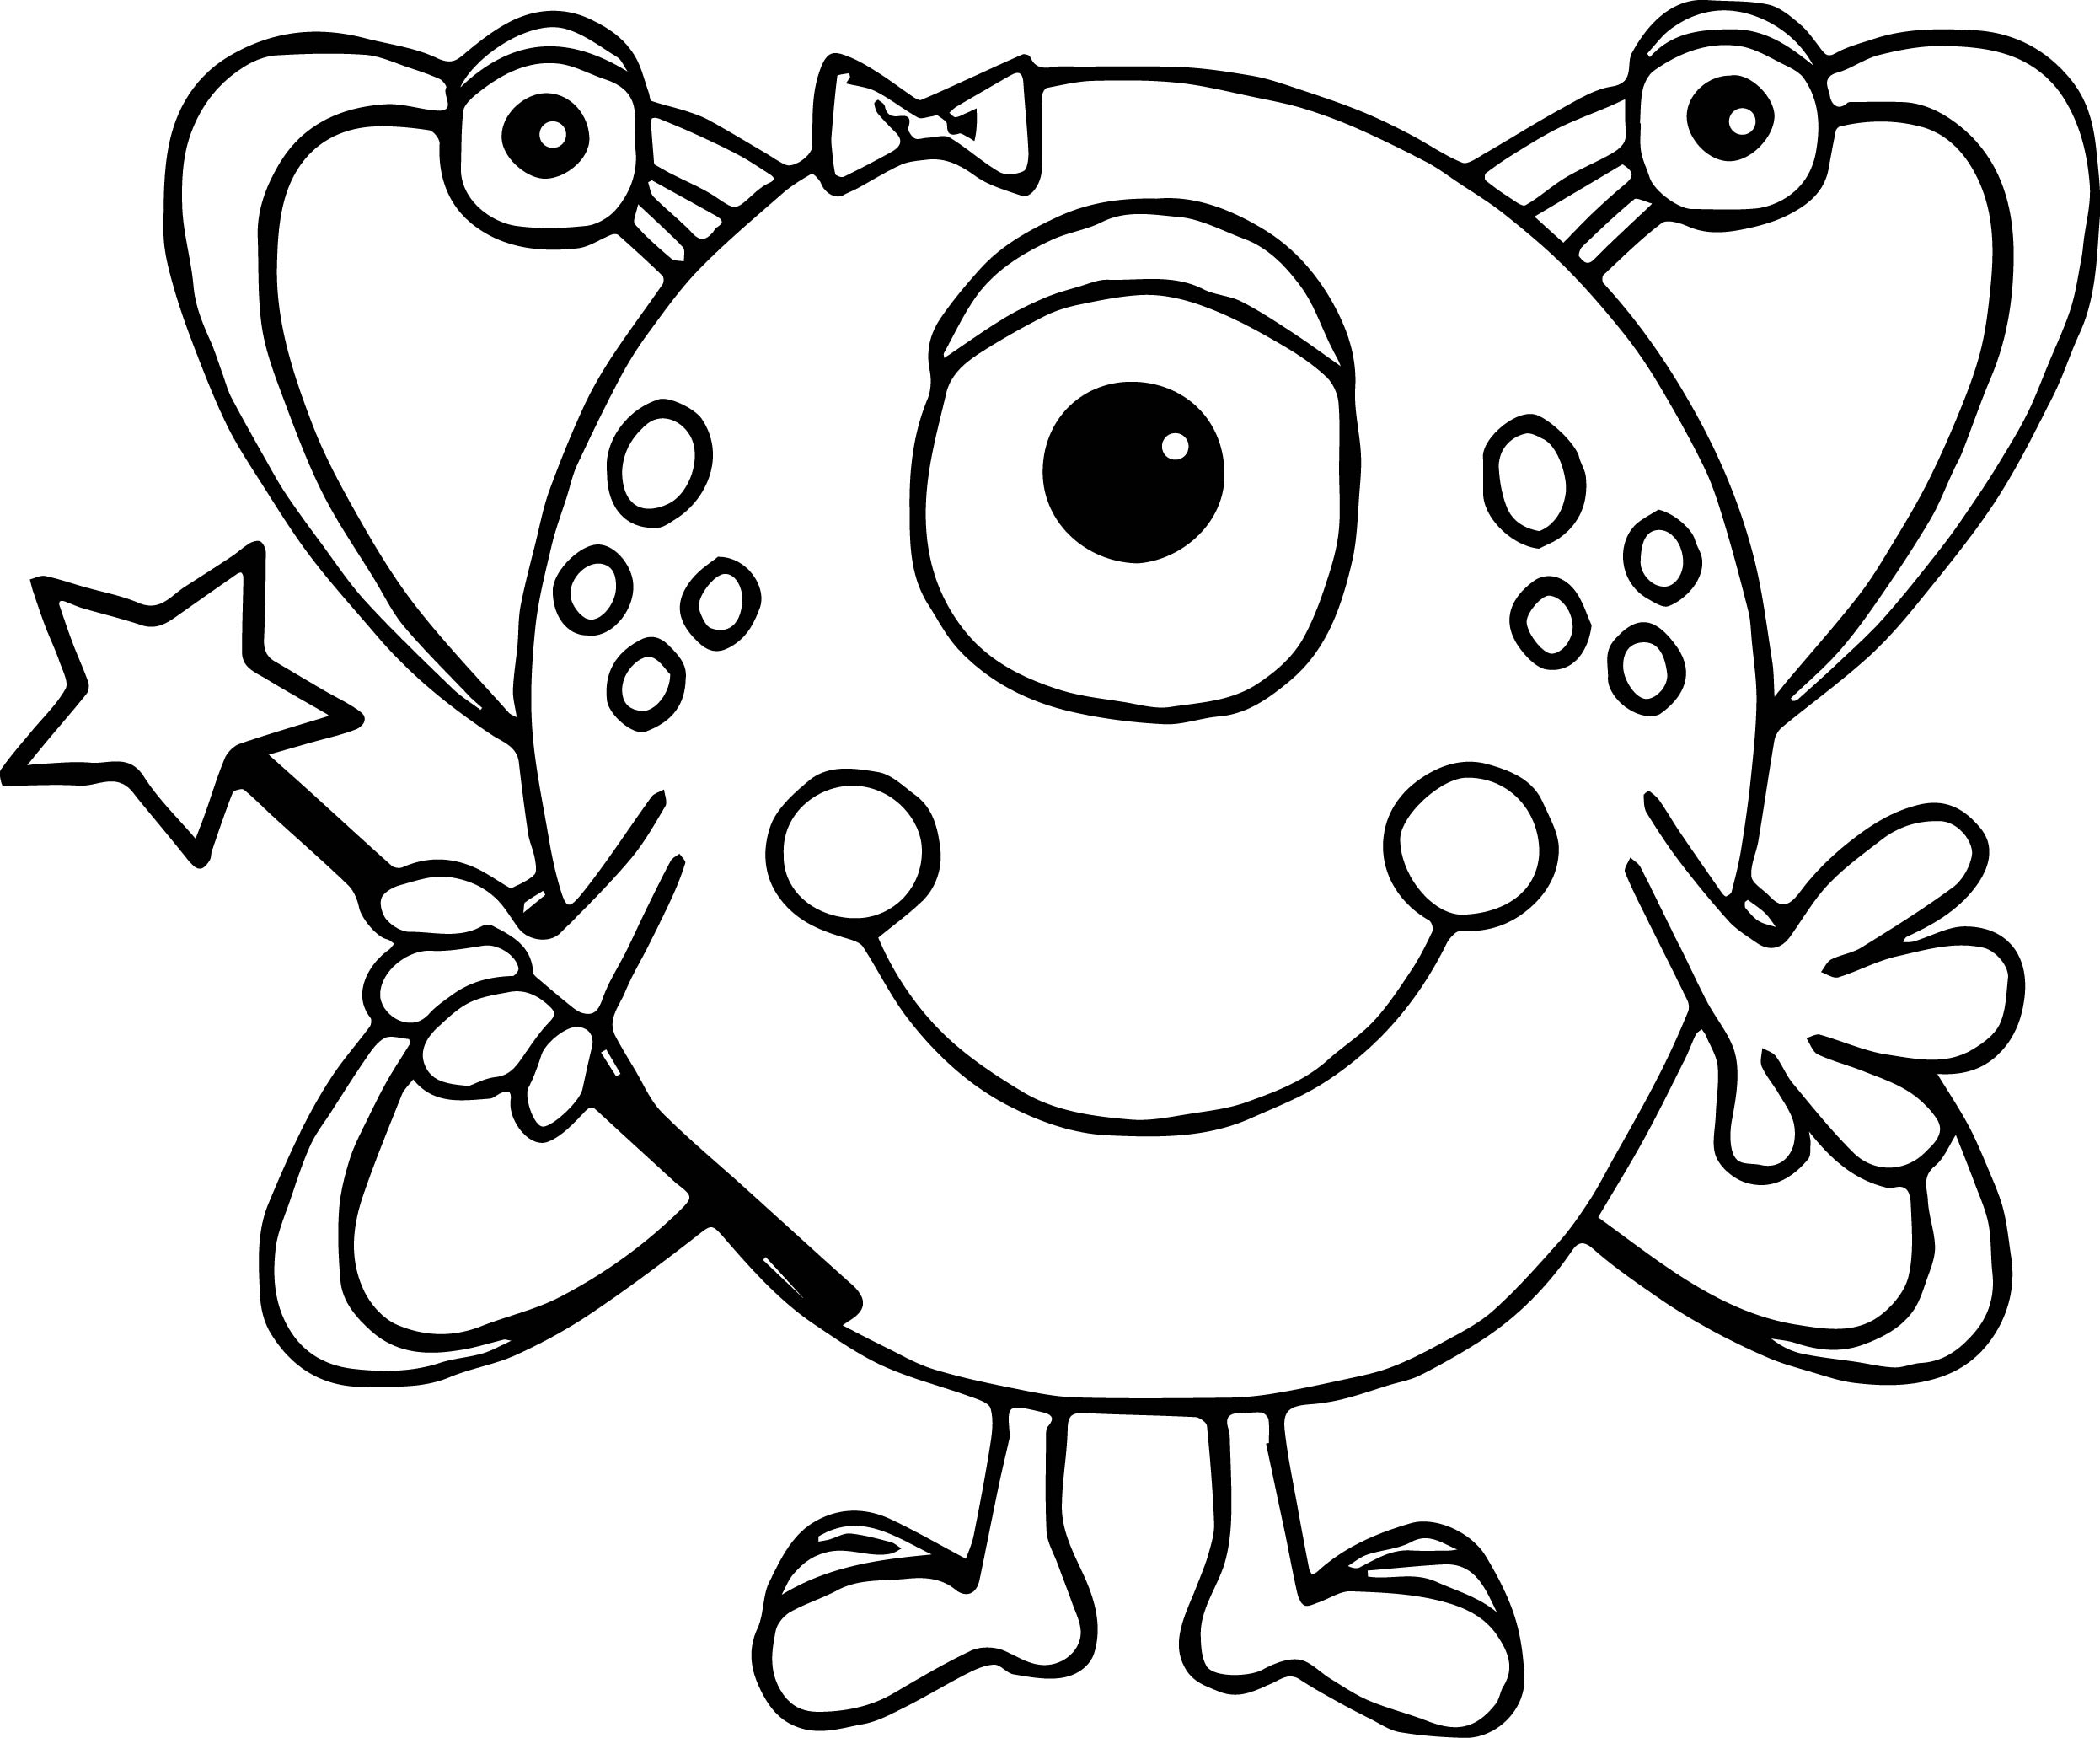 Cartoon Alien Coloring Pages at Free printable